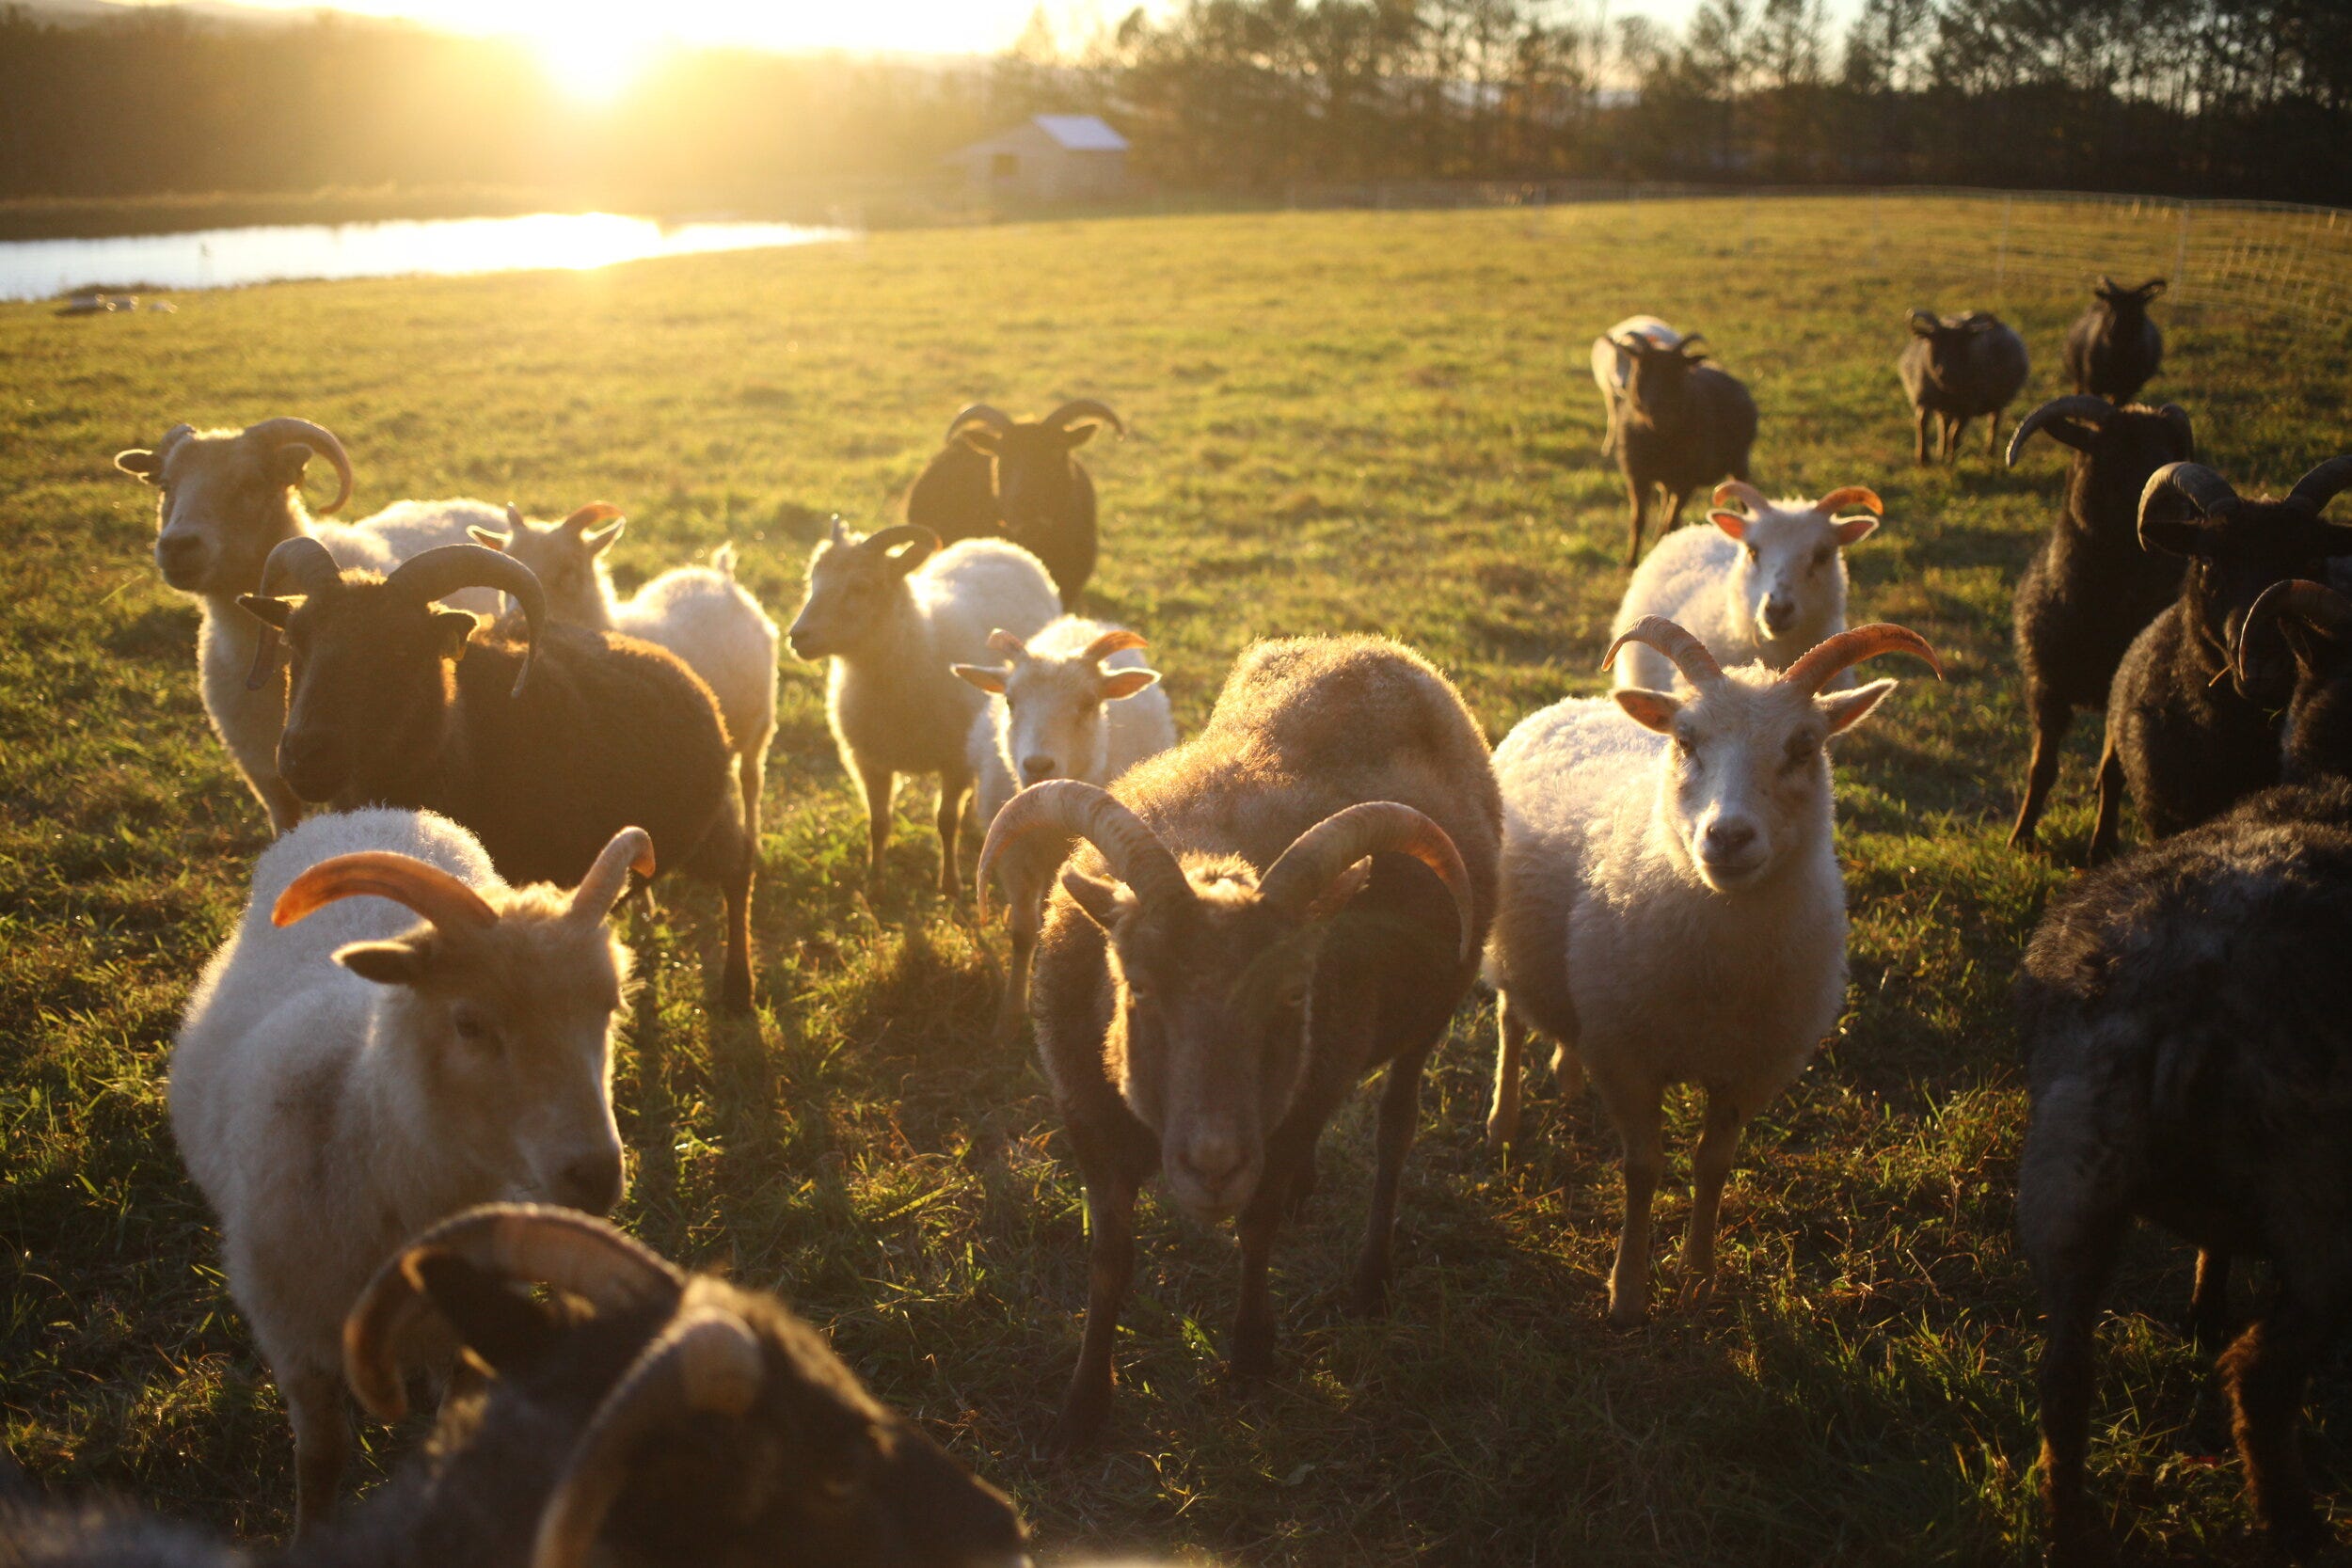 A flock of horned sheep standing in a field at sunset or sunrise